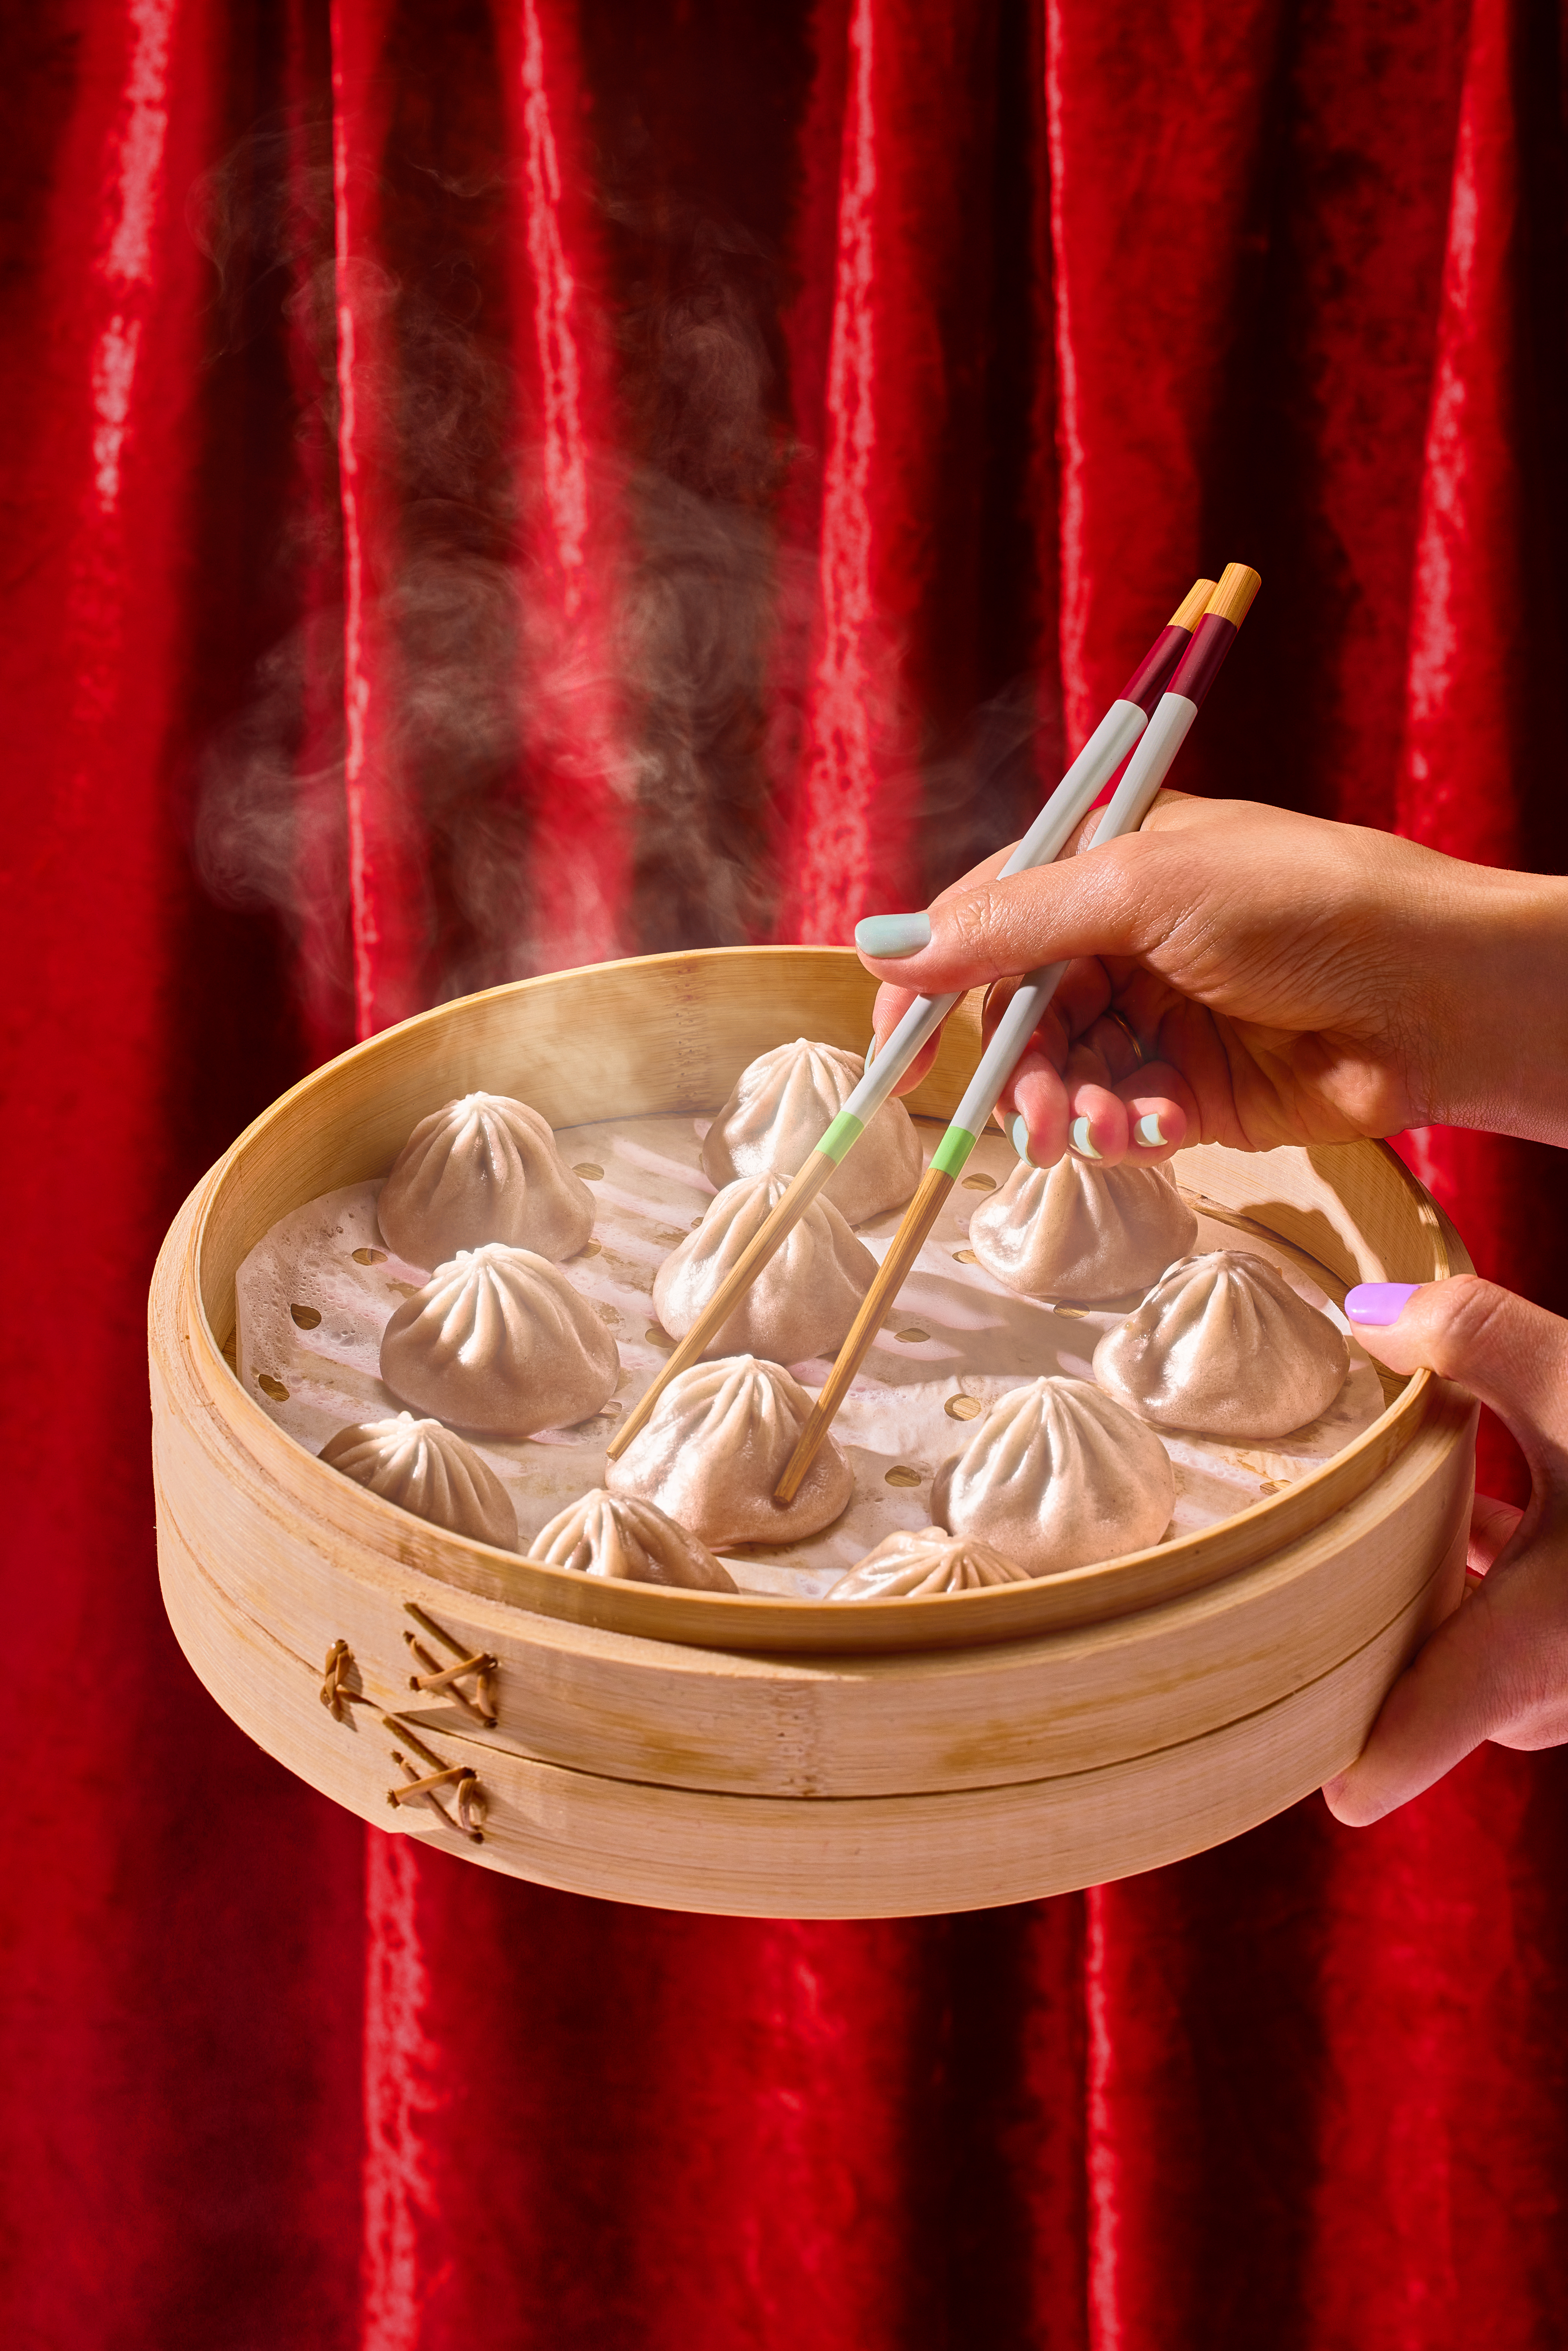 TikTok’s Favorite Soup Dumpling Brand Is Taking Over My Freezer, Here’s Why They’ll Take Over Yours Too